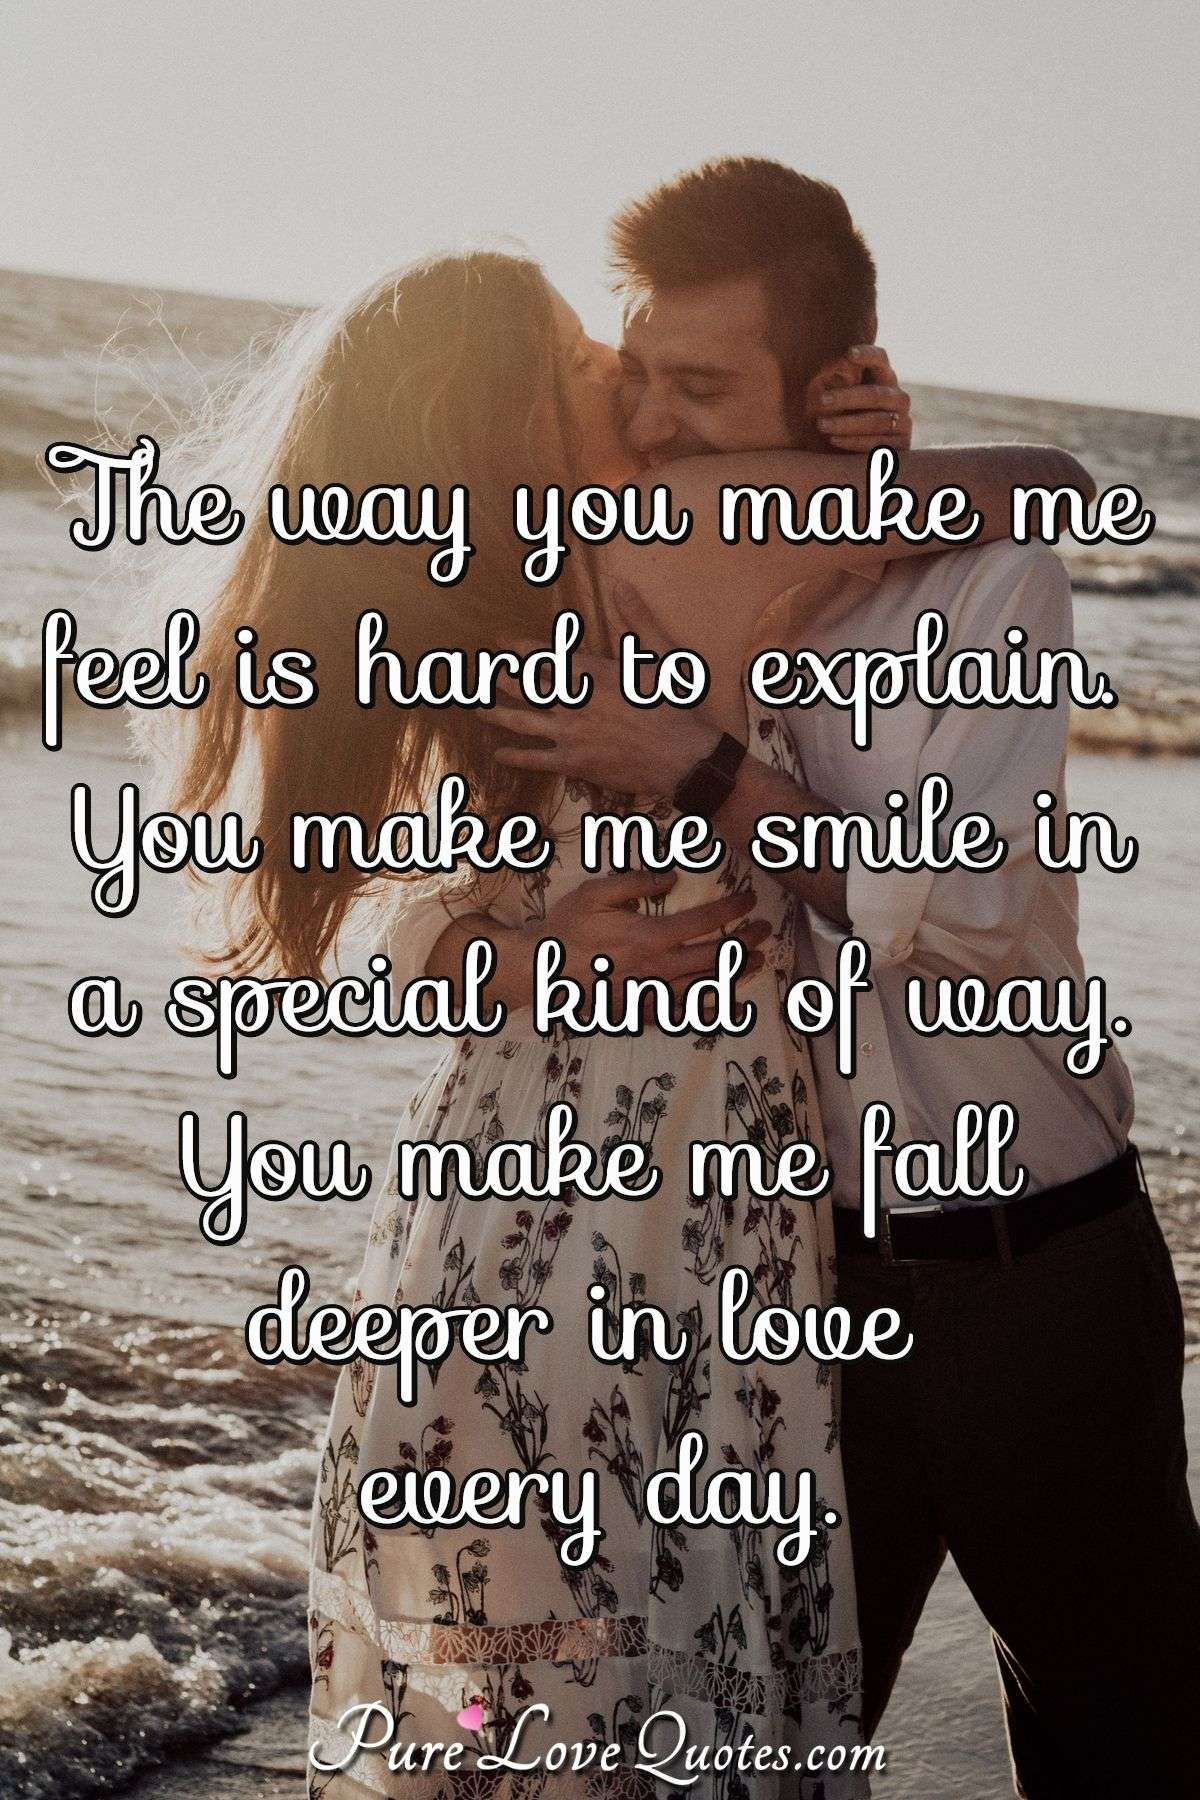 The way you make me feel is hard to explain. You make me smile in a special kind of way. You make me fall deeper in love every day. - Anonymous